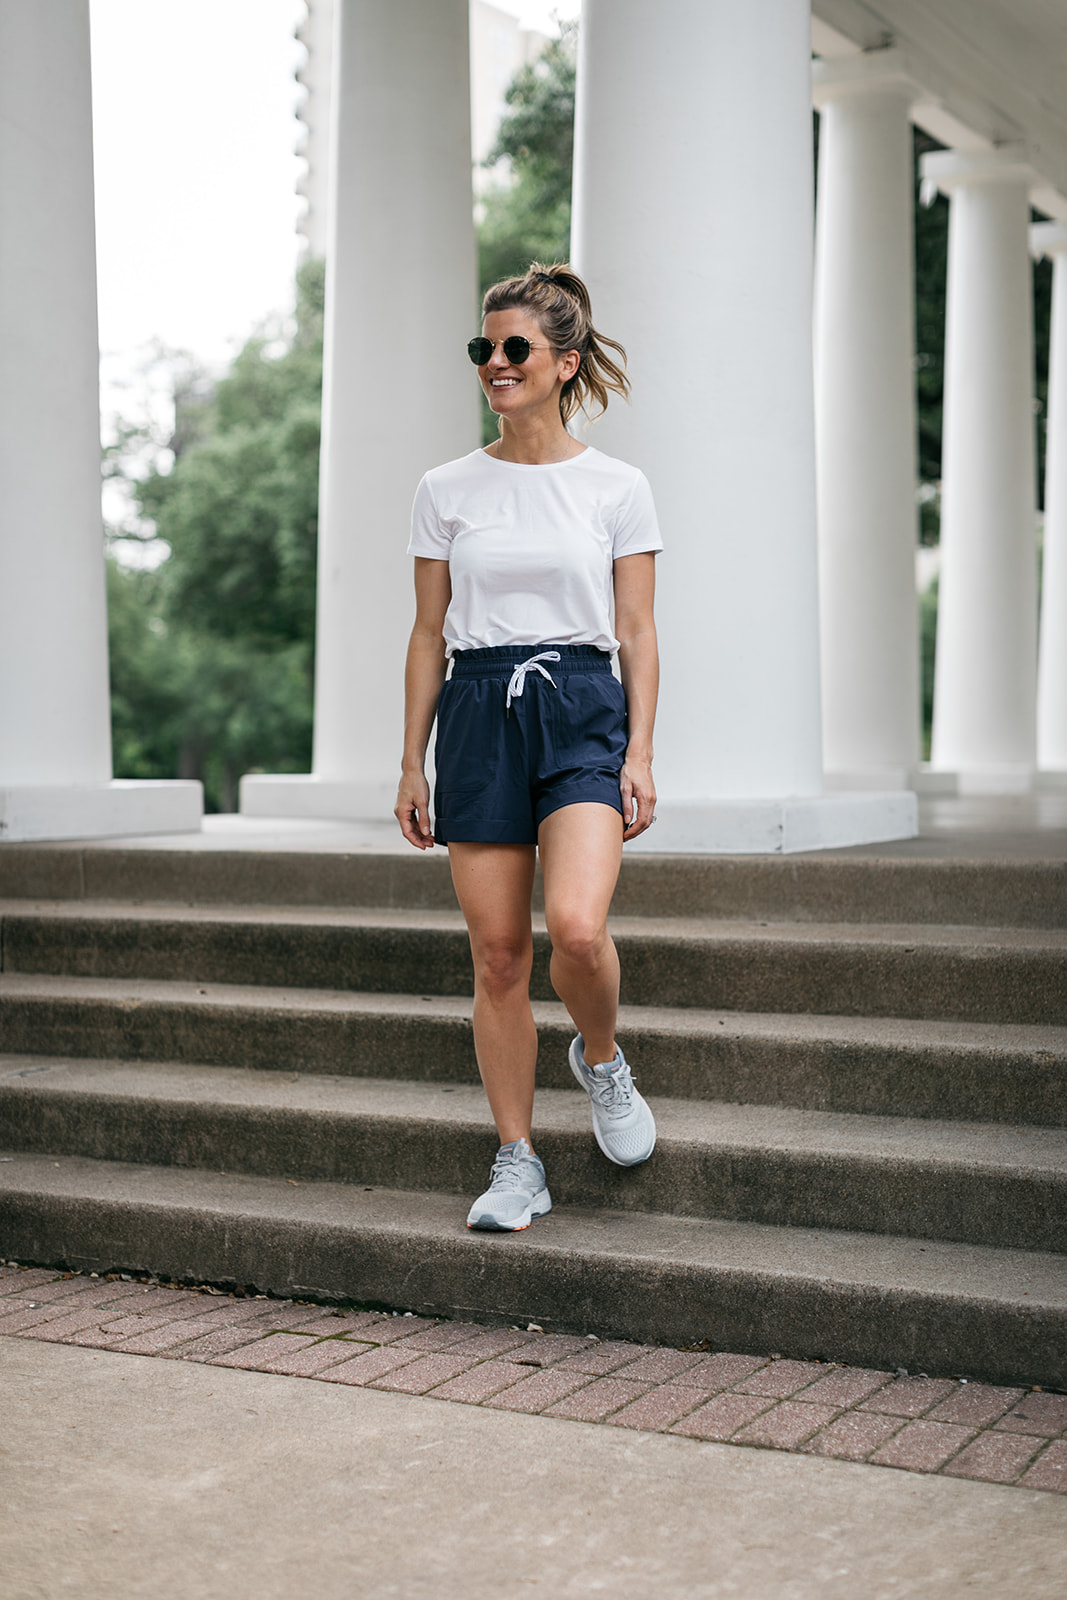 brighton butler wearing nordstrom athleisure blue shorts and white tee